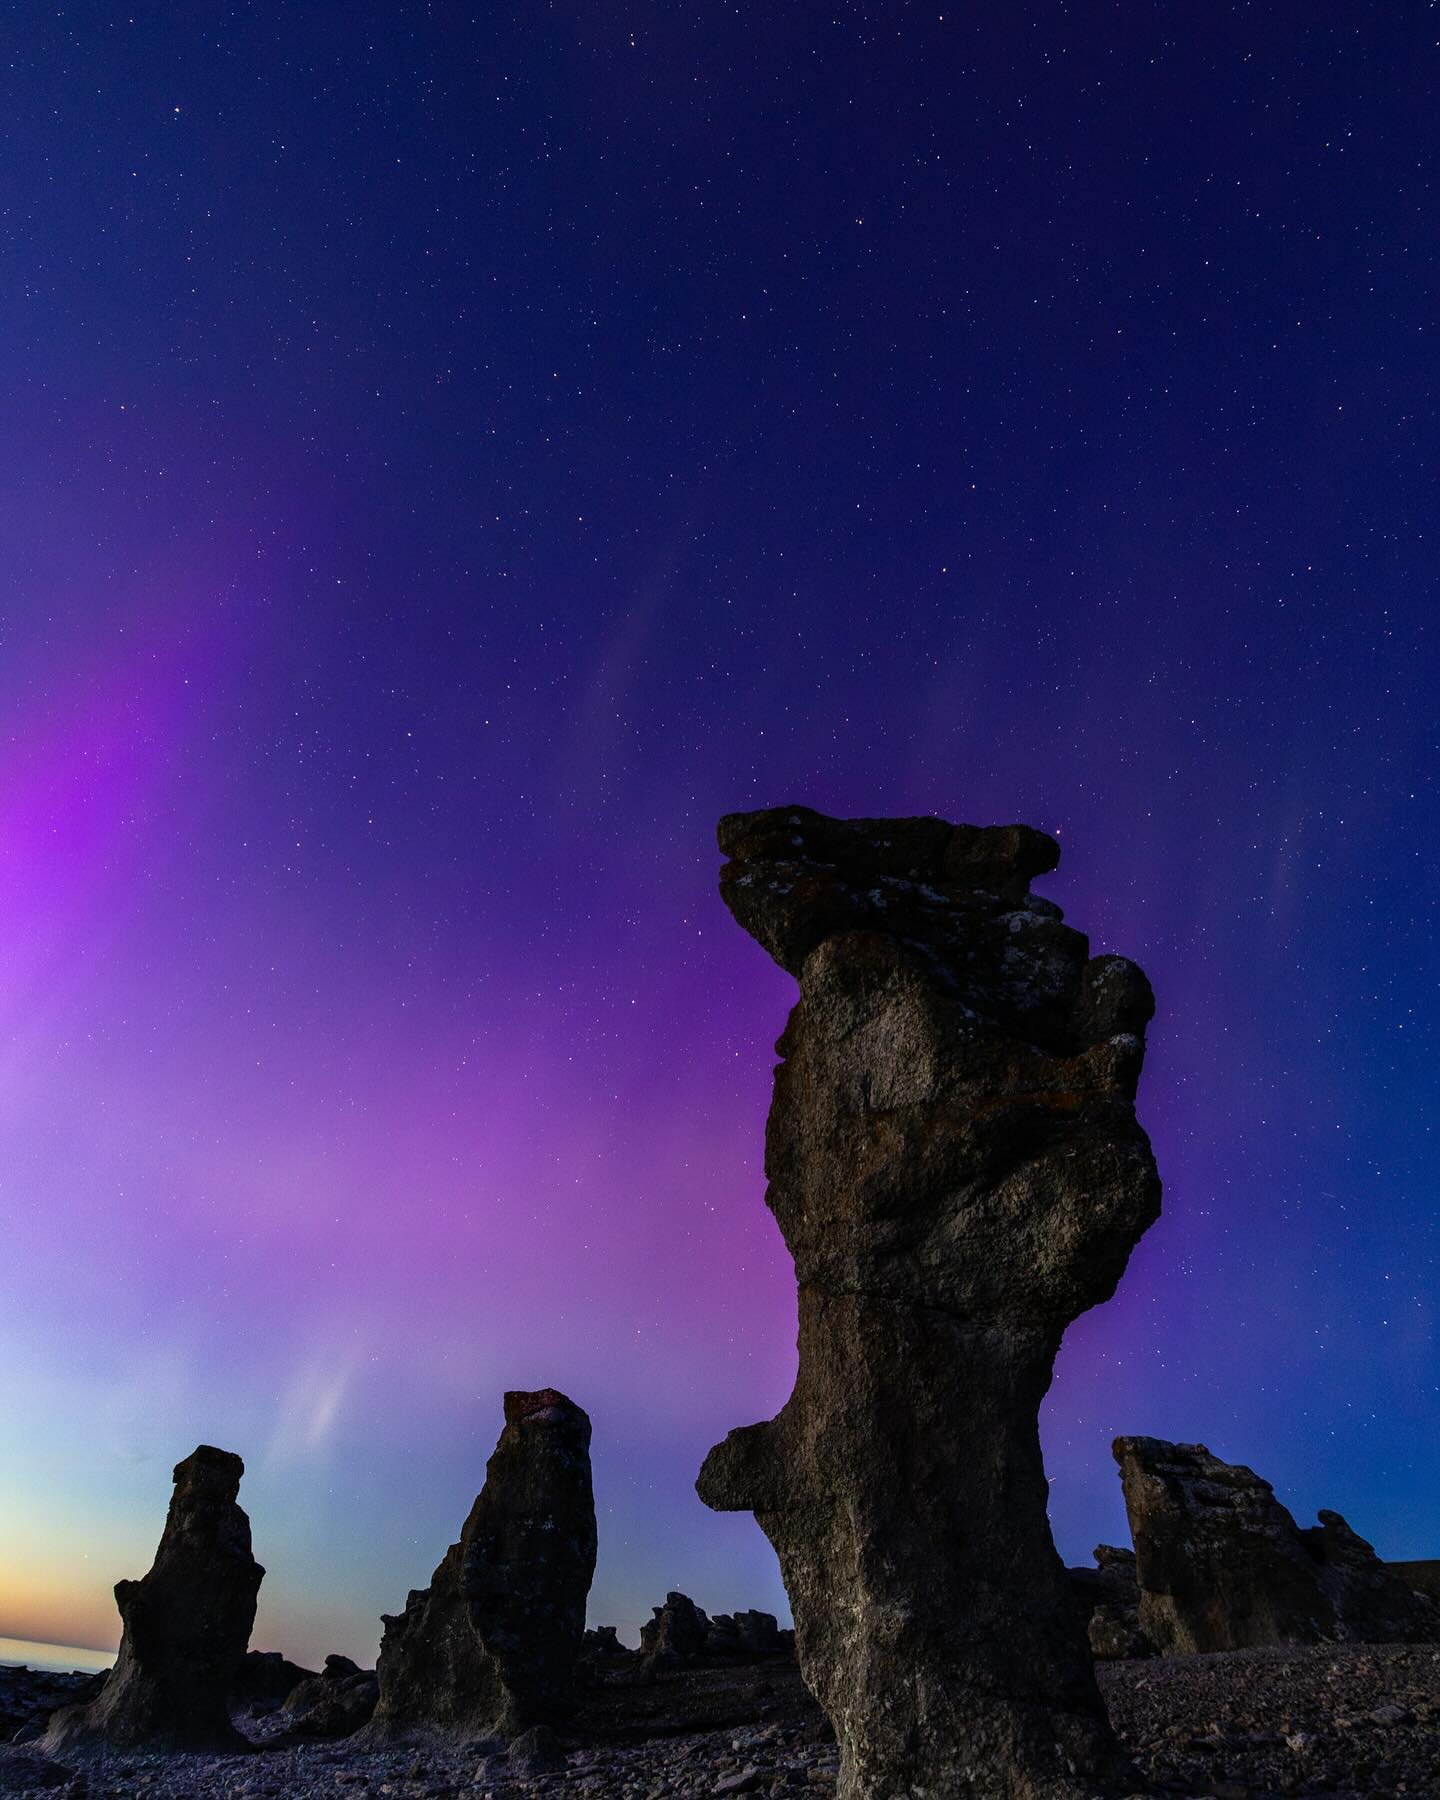 Last night we got the chance to witness another great display of Northern Lights on Gotland. This time we went to one of the most famous fields of limestone seastacks (in Swedish called &ldquo;raukar&rdquo;). Those massive rock formations posed very 